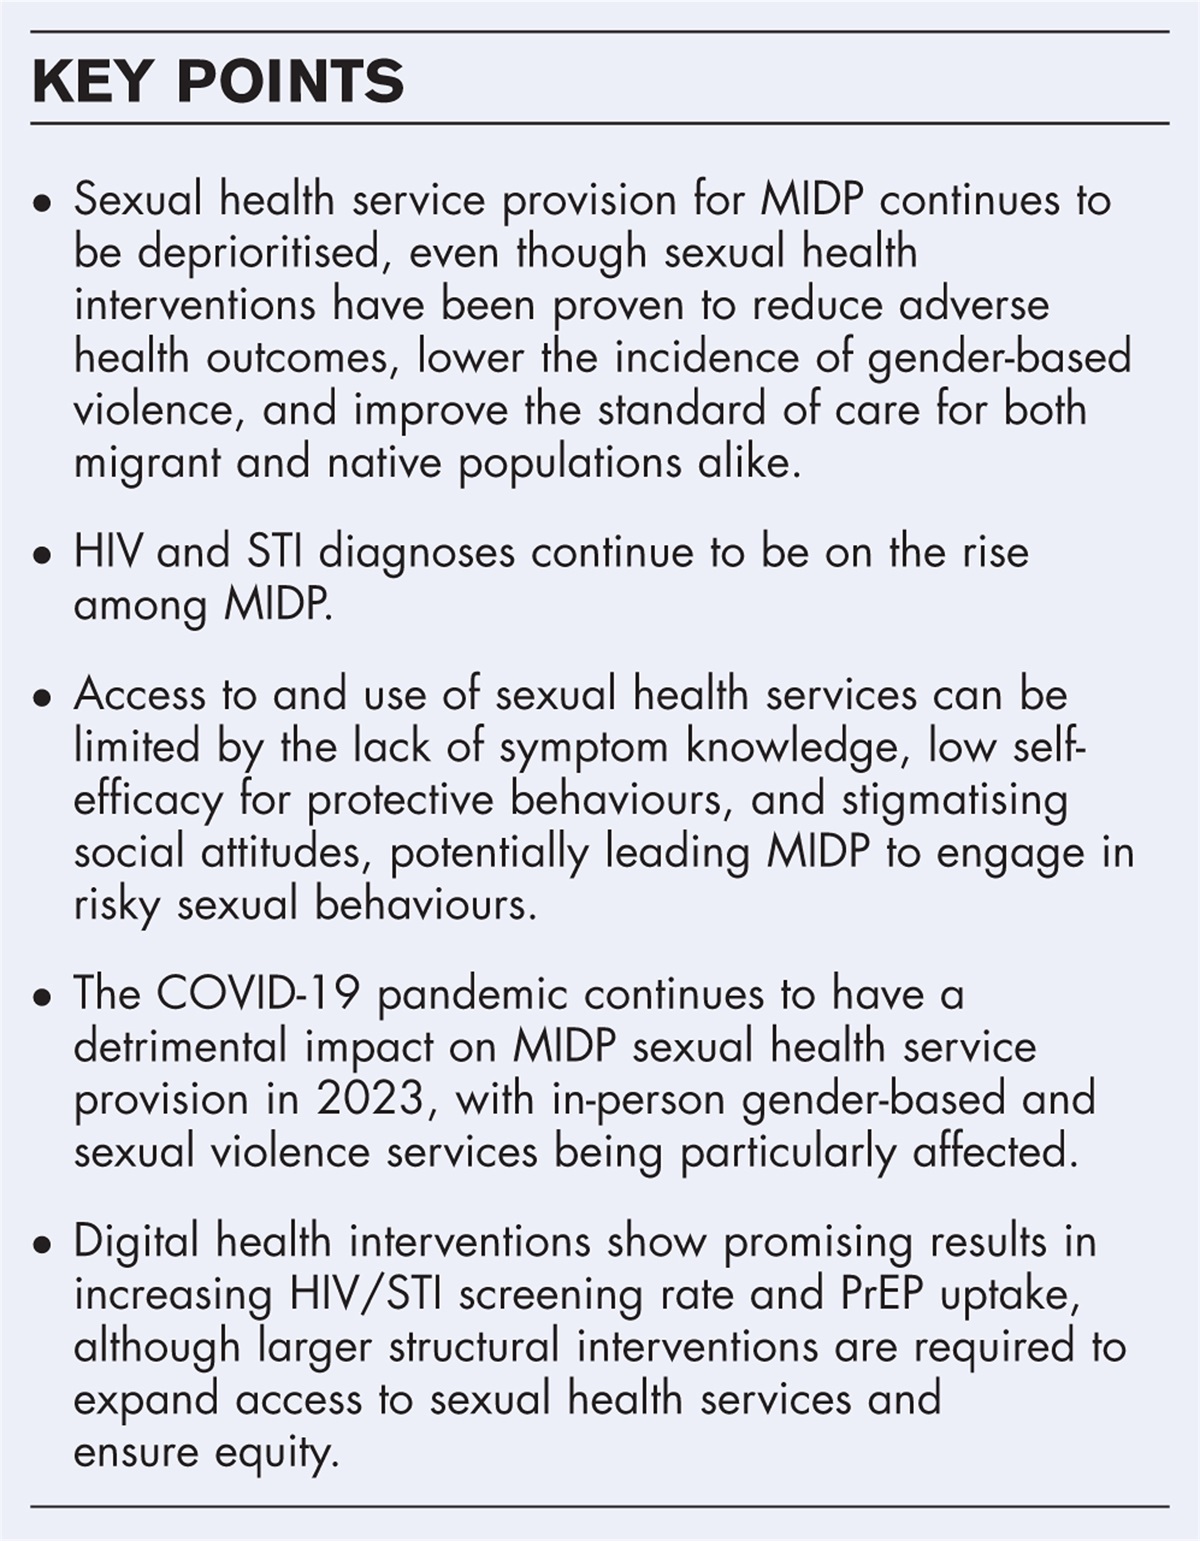 Sexual health challenges in migrant, immigrant, and displaced populations 2022–2023